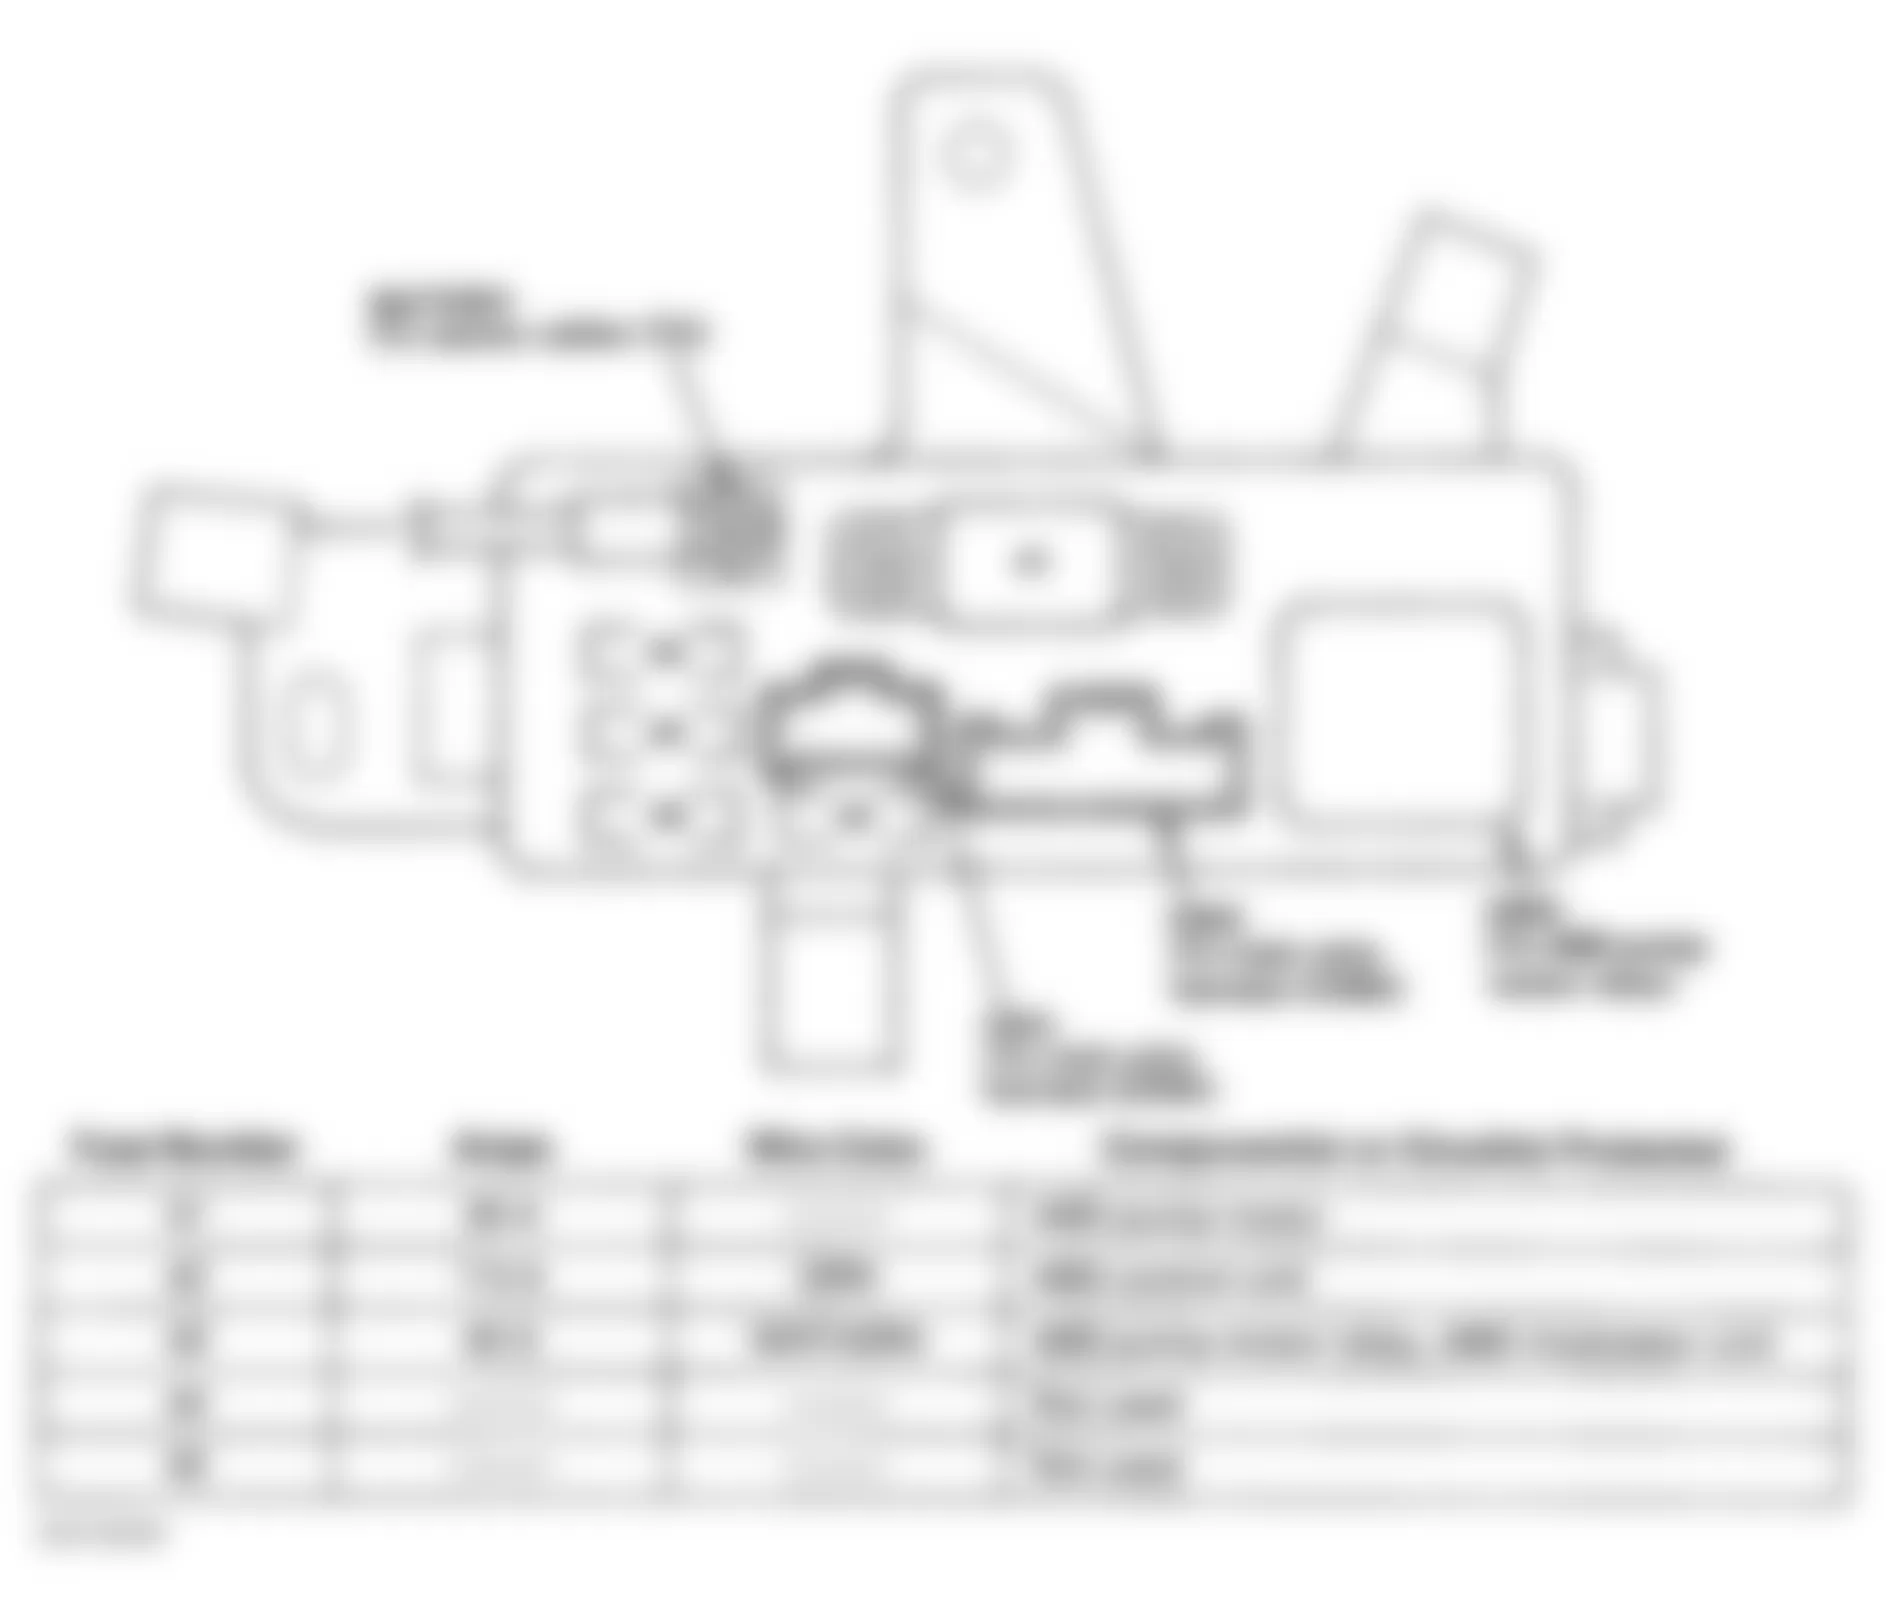 Isuzu Oasis S 1998 - Component Locations -  Identifying Under-Hood ABS Fuse/Relay Box